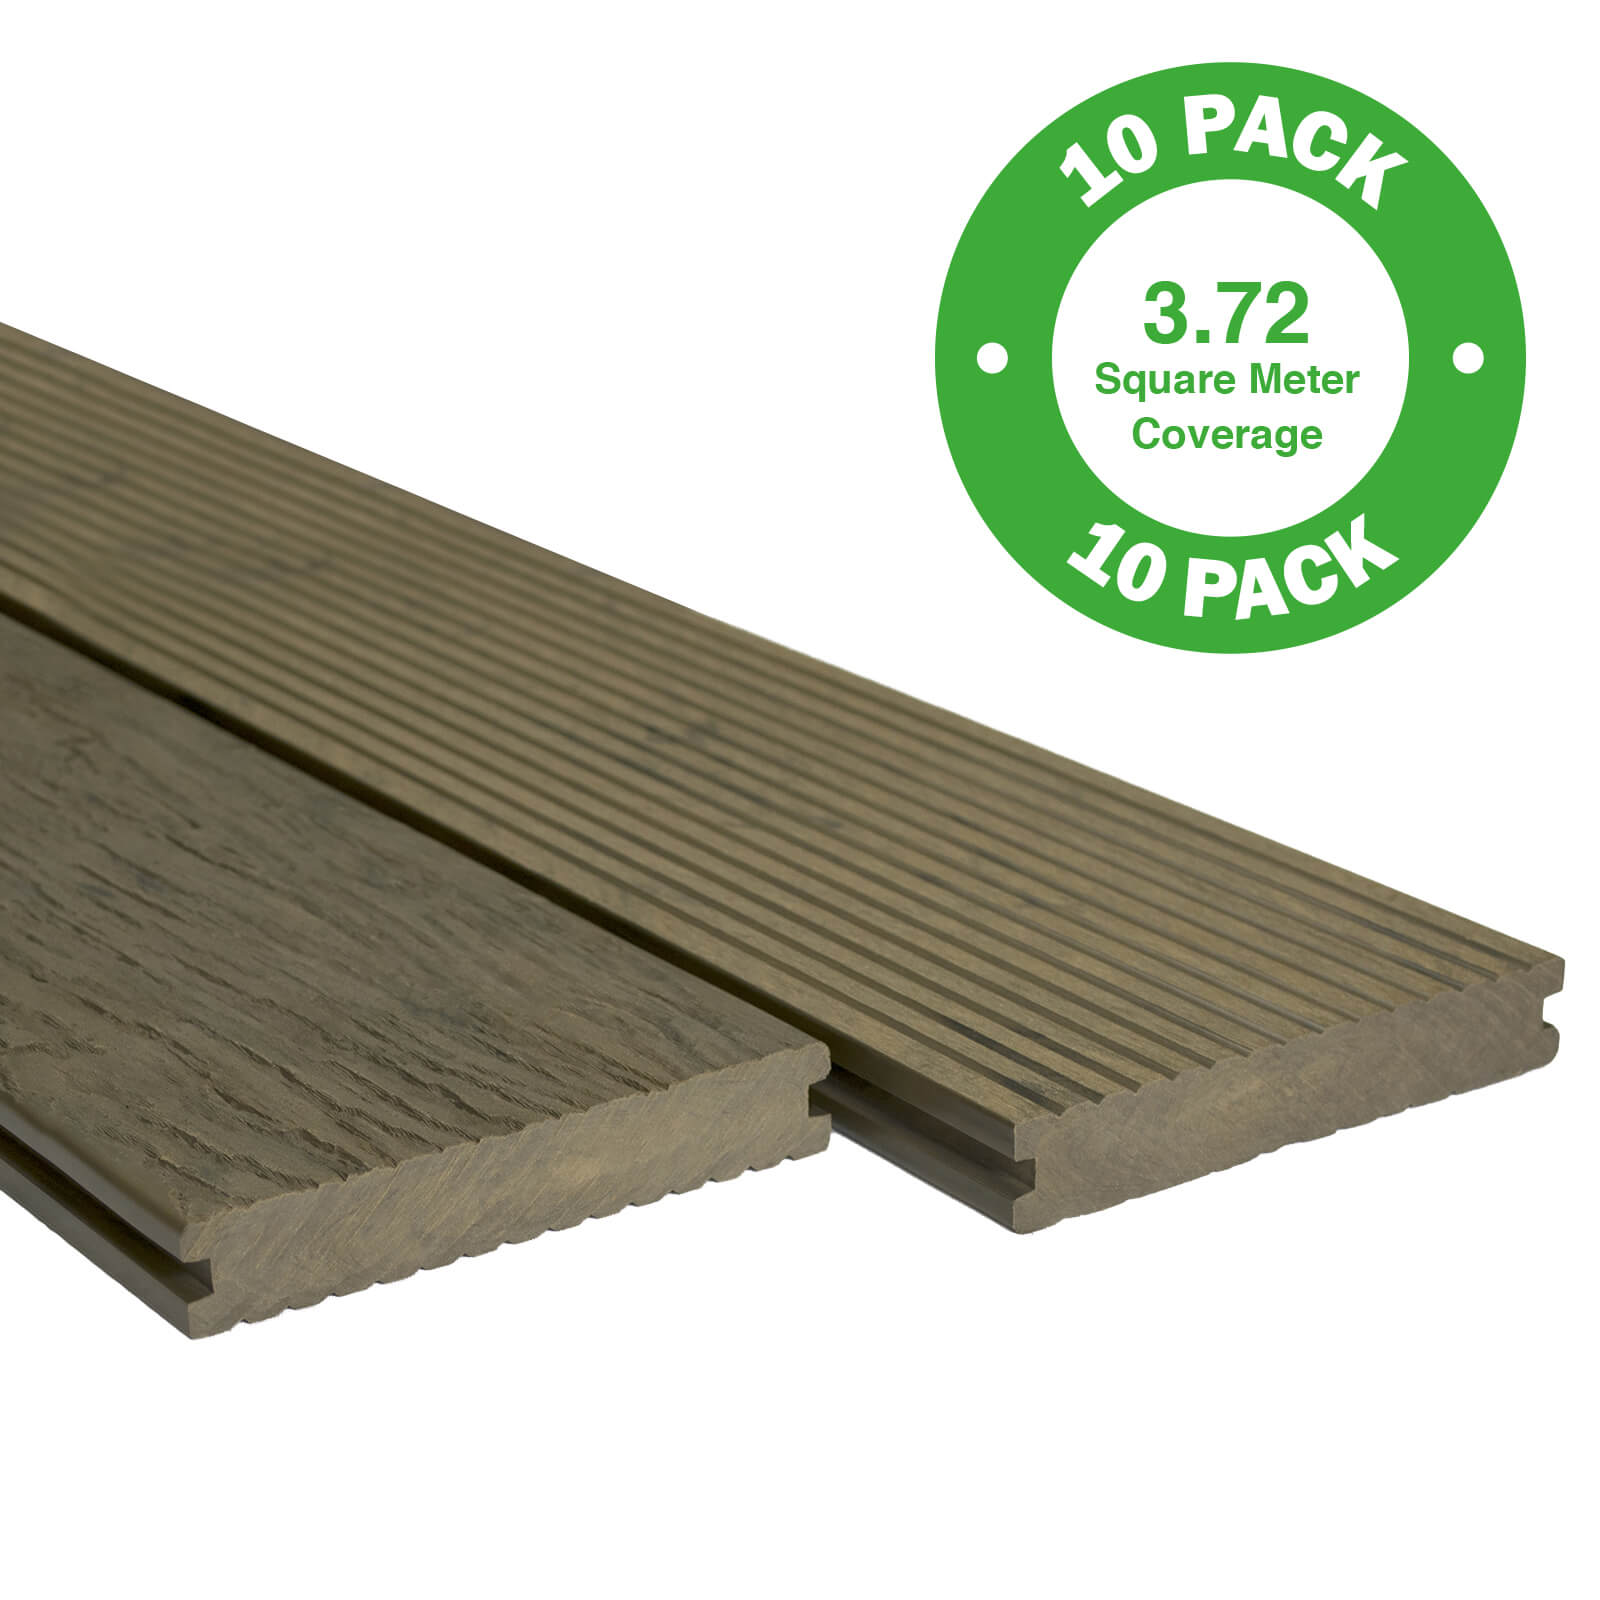 Photo of Heritage Composite Decking 10 Pack Oak - 3.72 M2